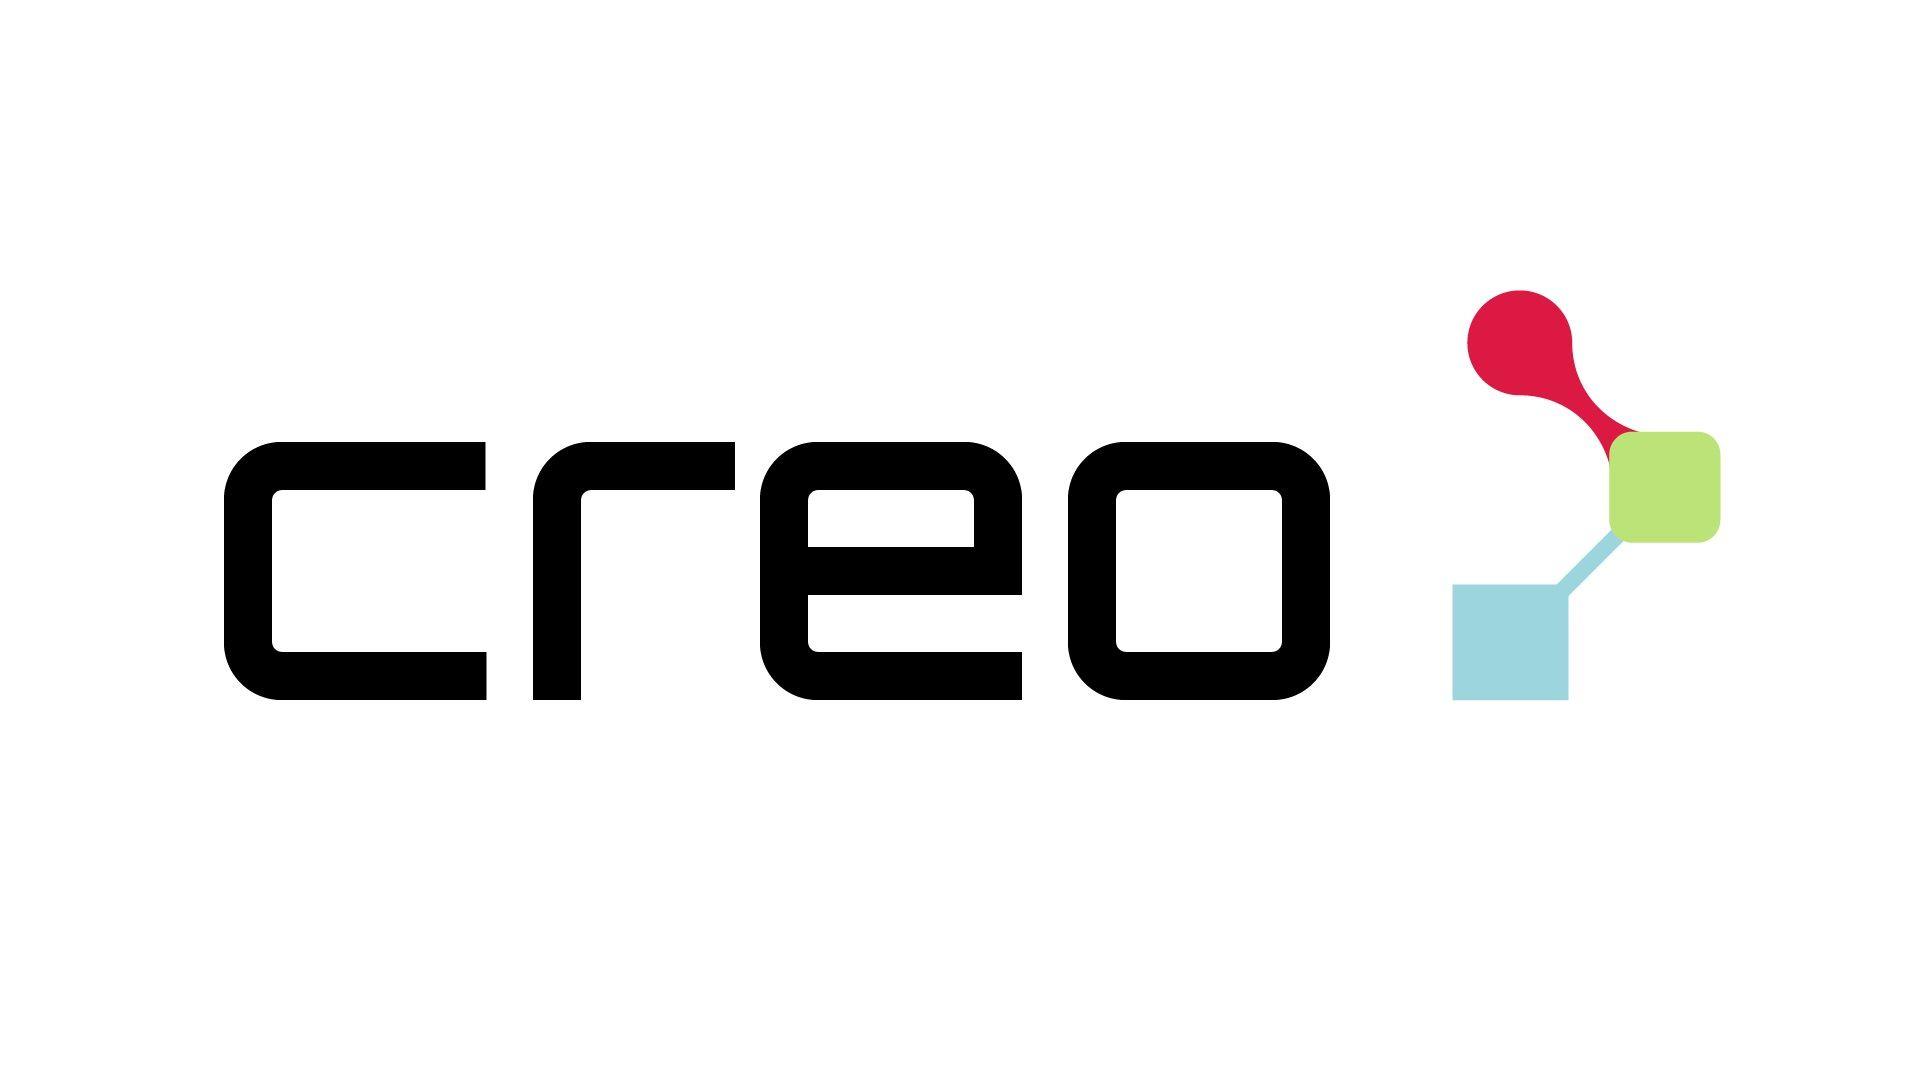 Creo Logo - Glitched out Creo logo mobile wallpaper from “The Surge”; a sci-fi ...